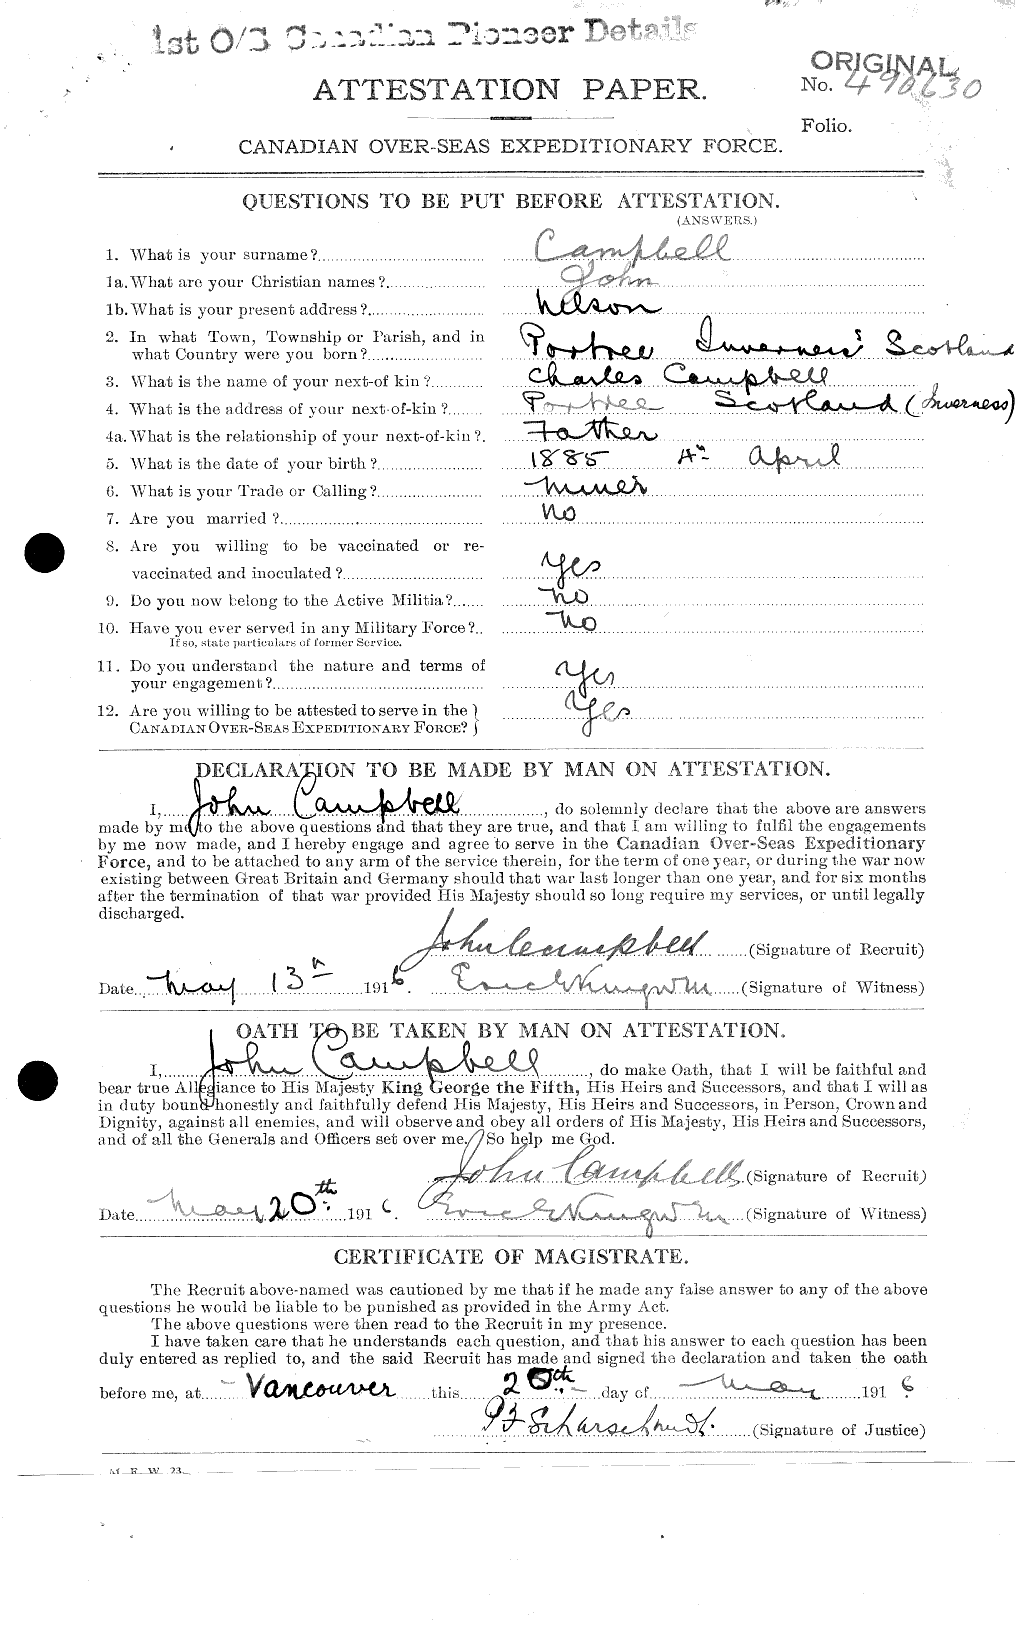 Personnel Records of the First World War - CEF 006839a